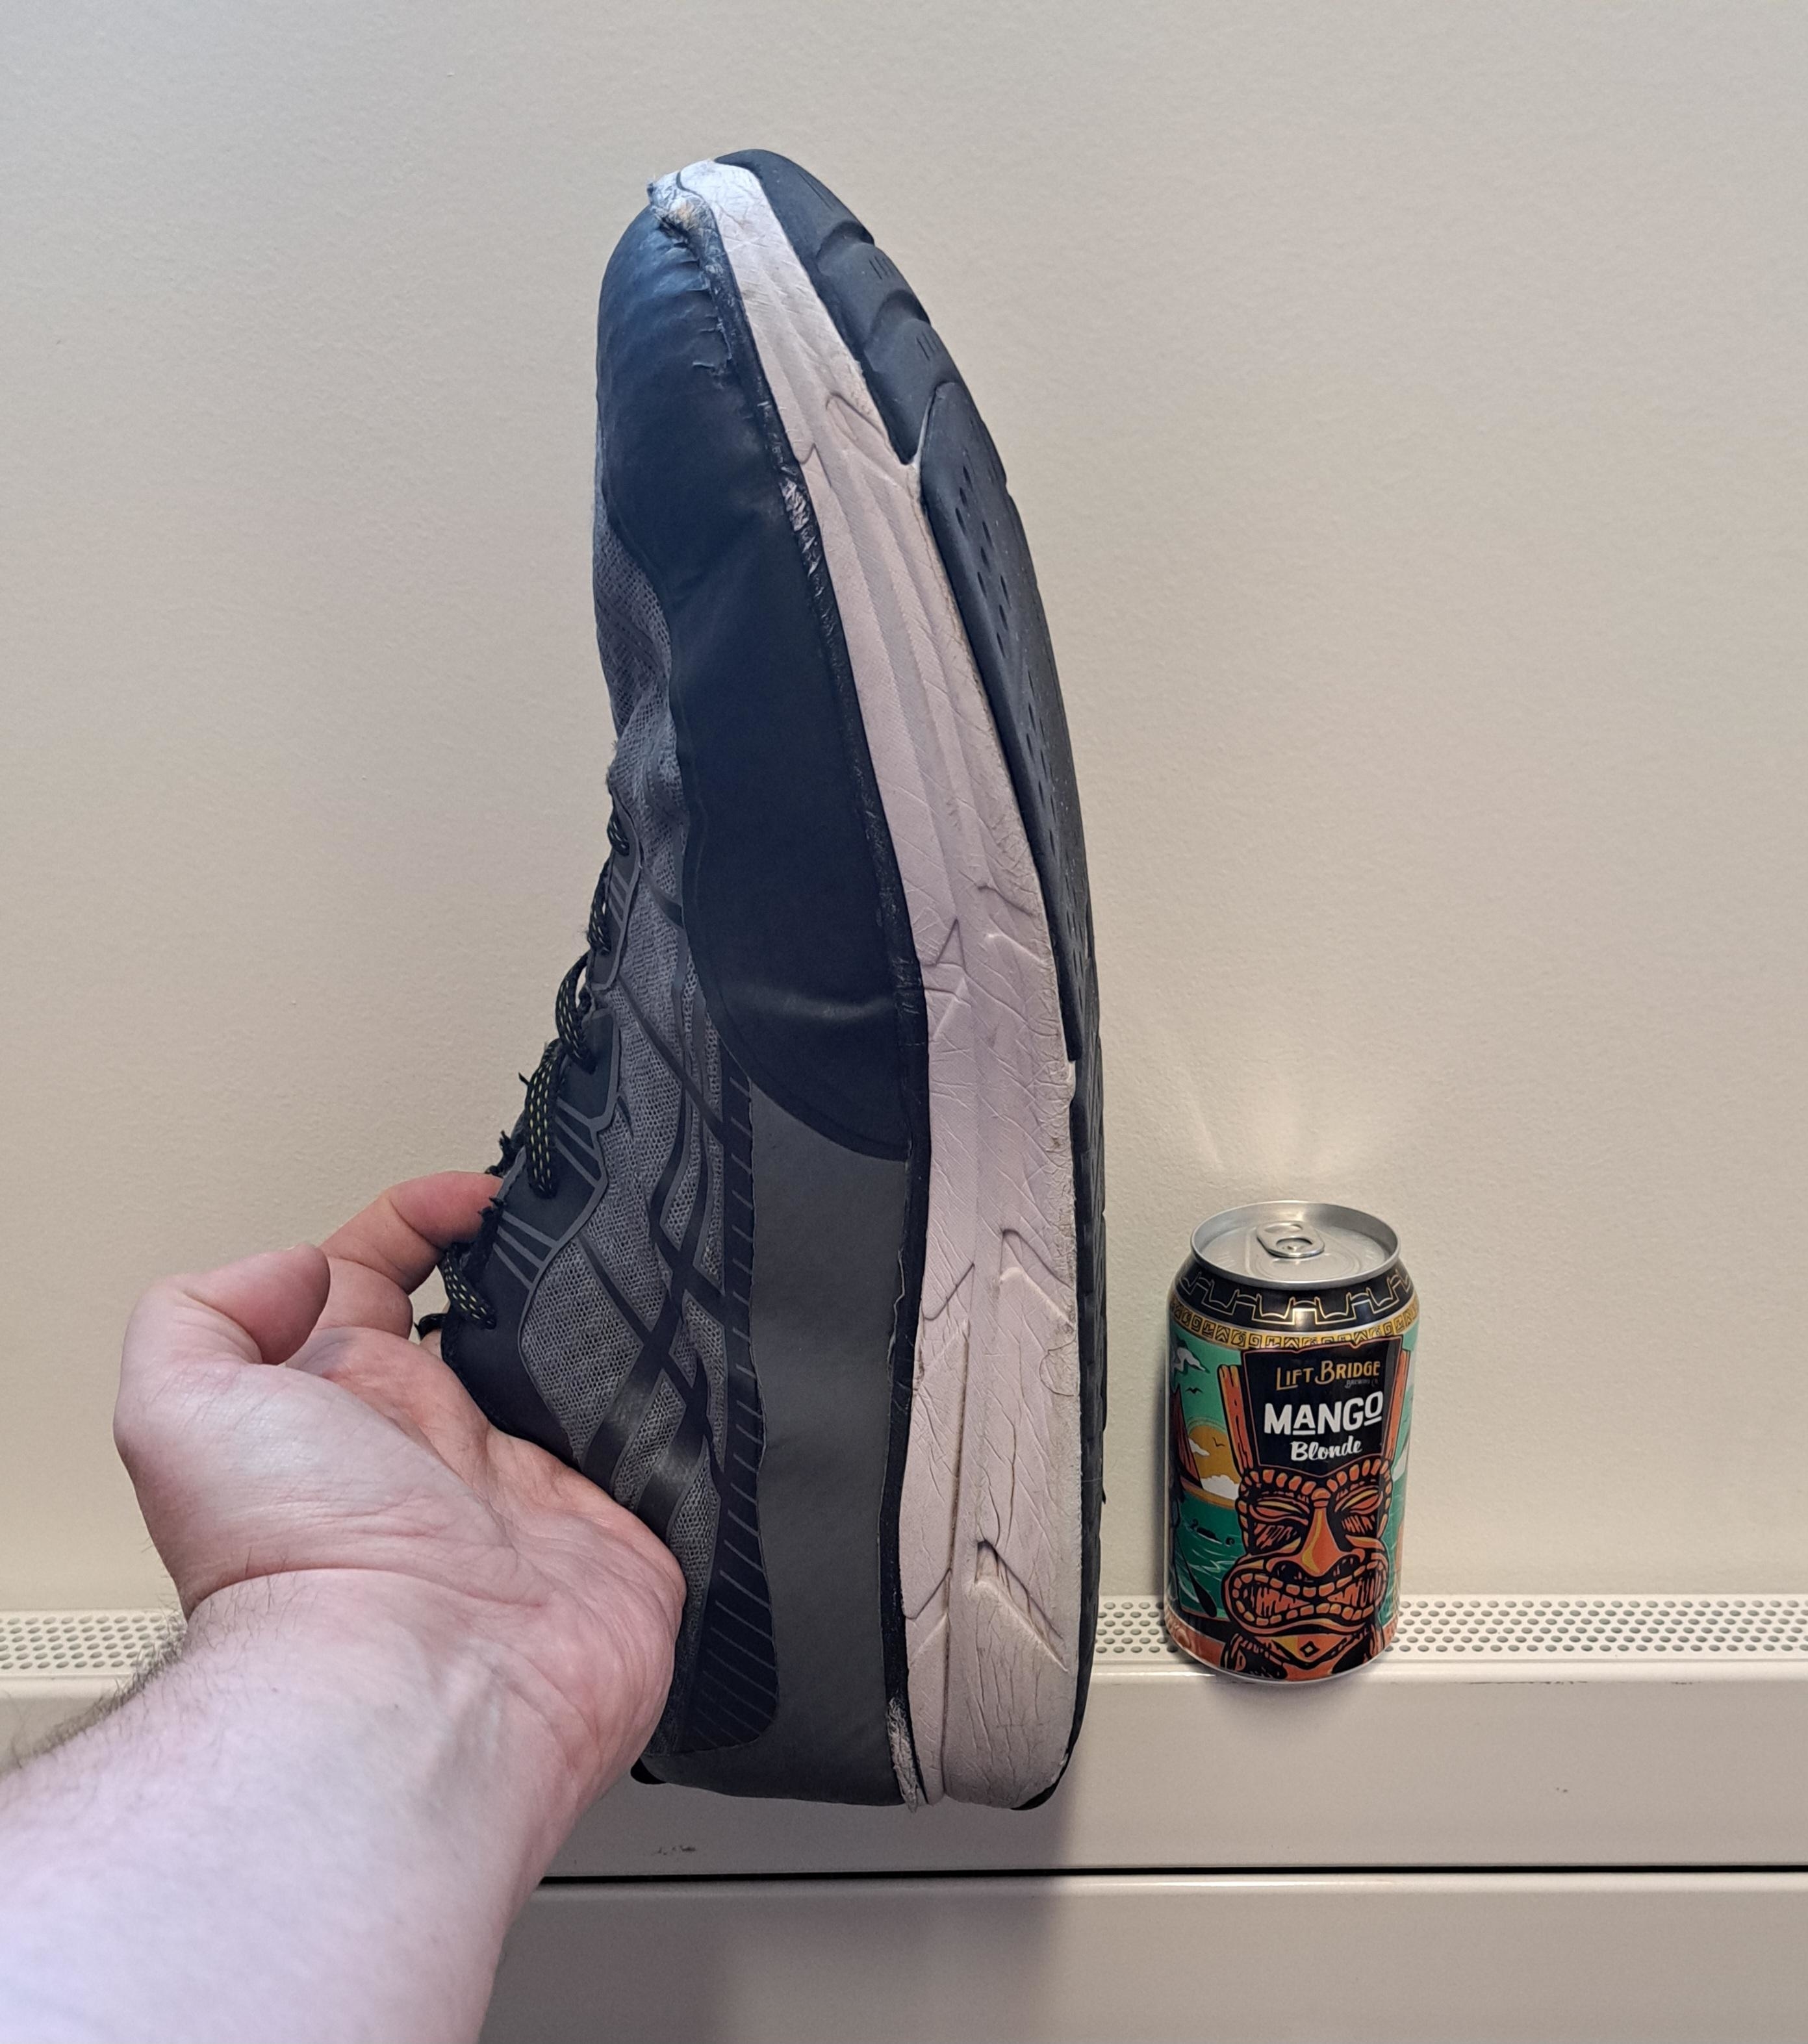 The sneaker is at least three or four times higher than the can